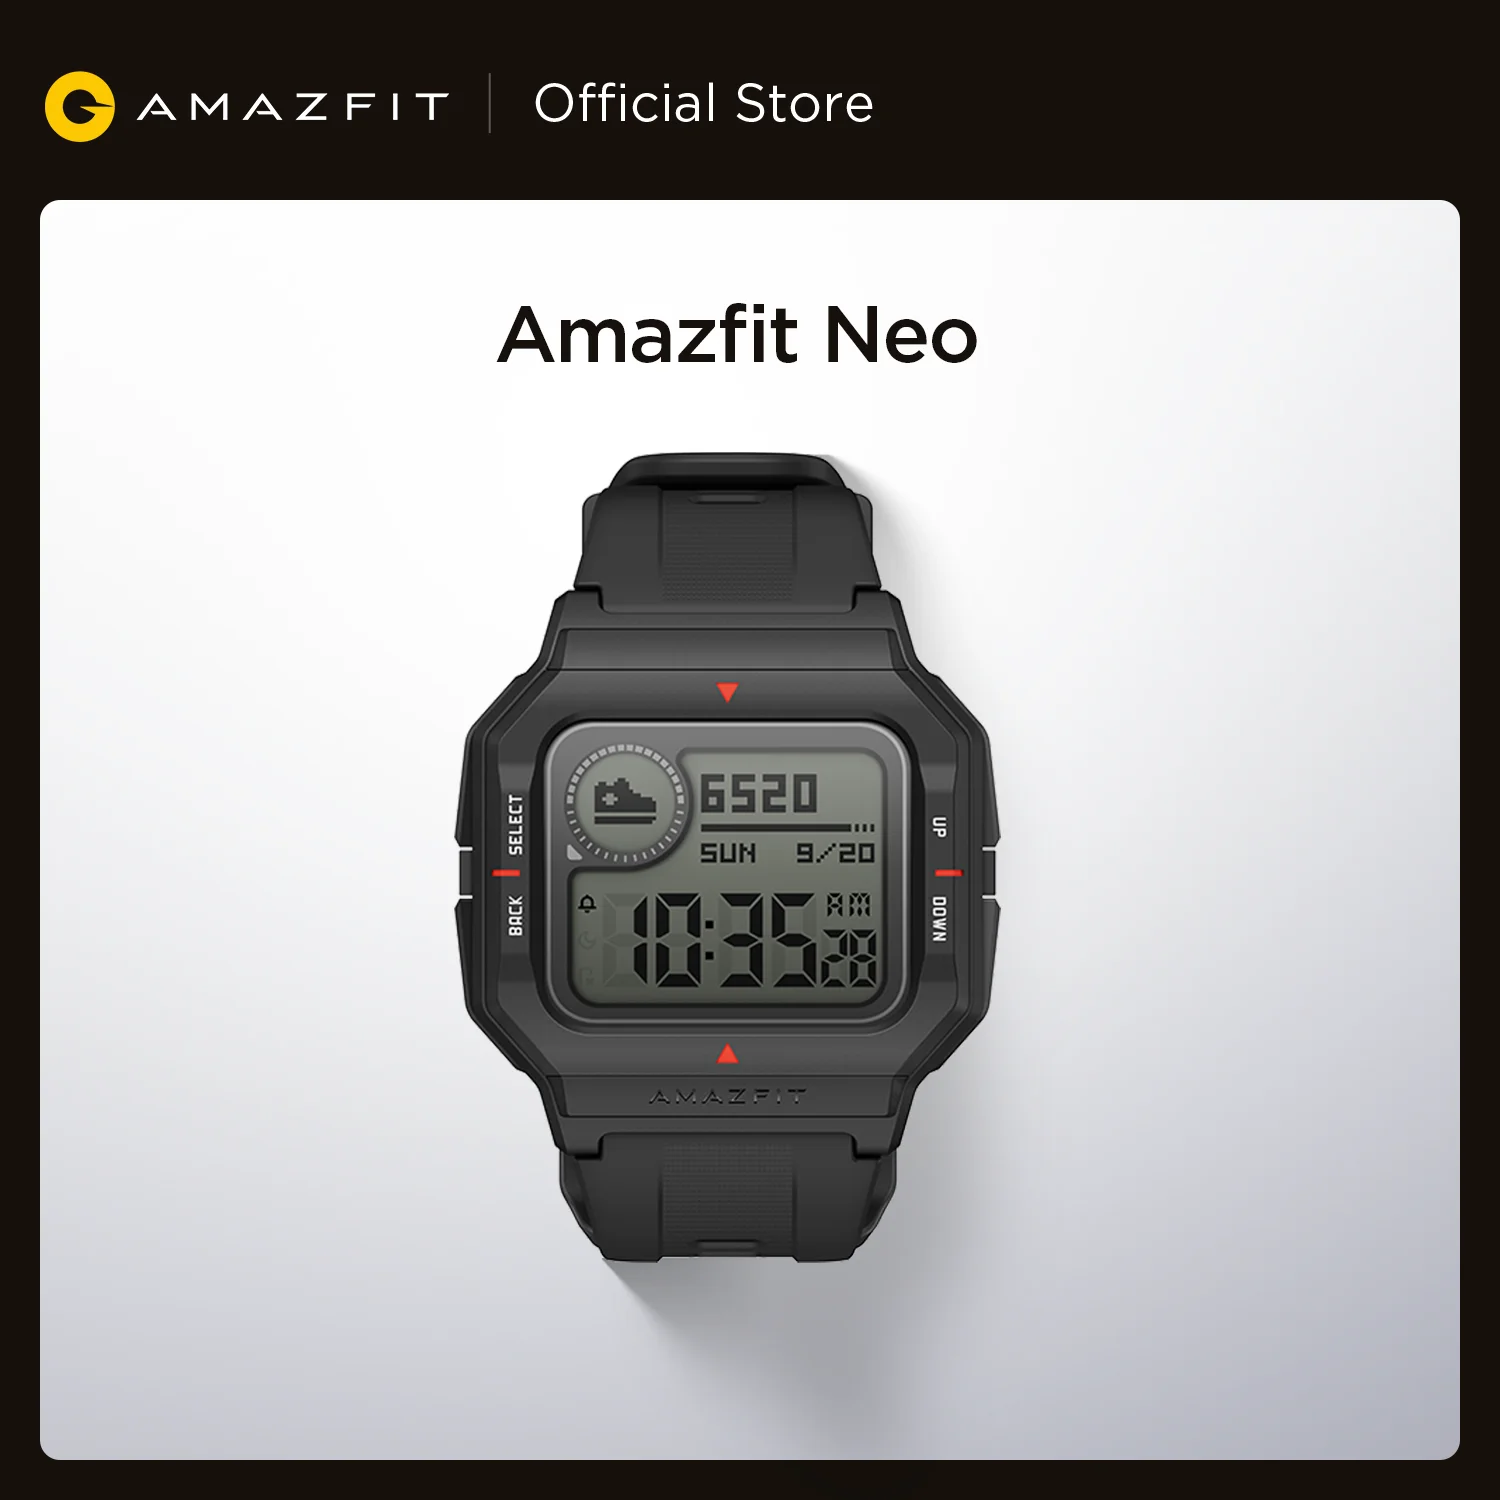 NEW 2020 Amazfit Neo Smart Watch Bluetooth Smartwatch 5ATM Tracking 28Days Battery Life Watch For Android IOS Phone